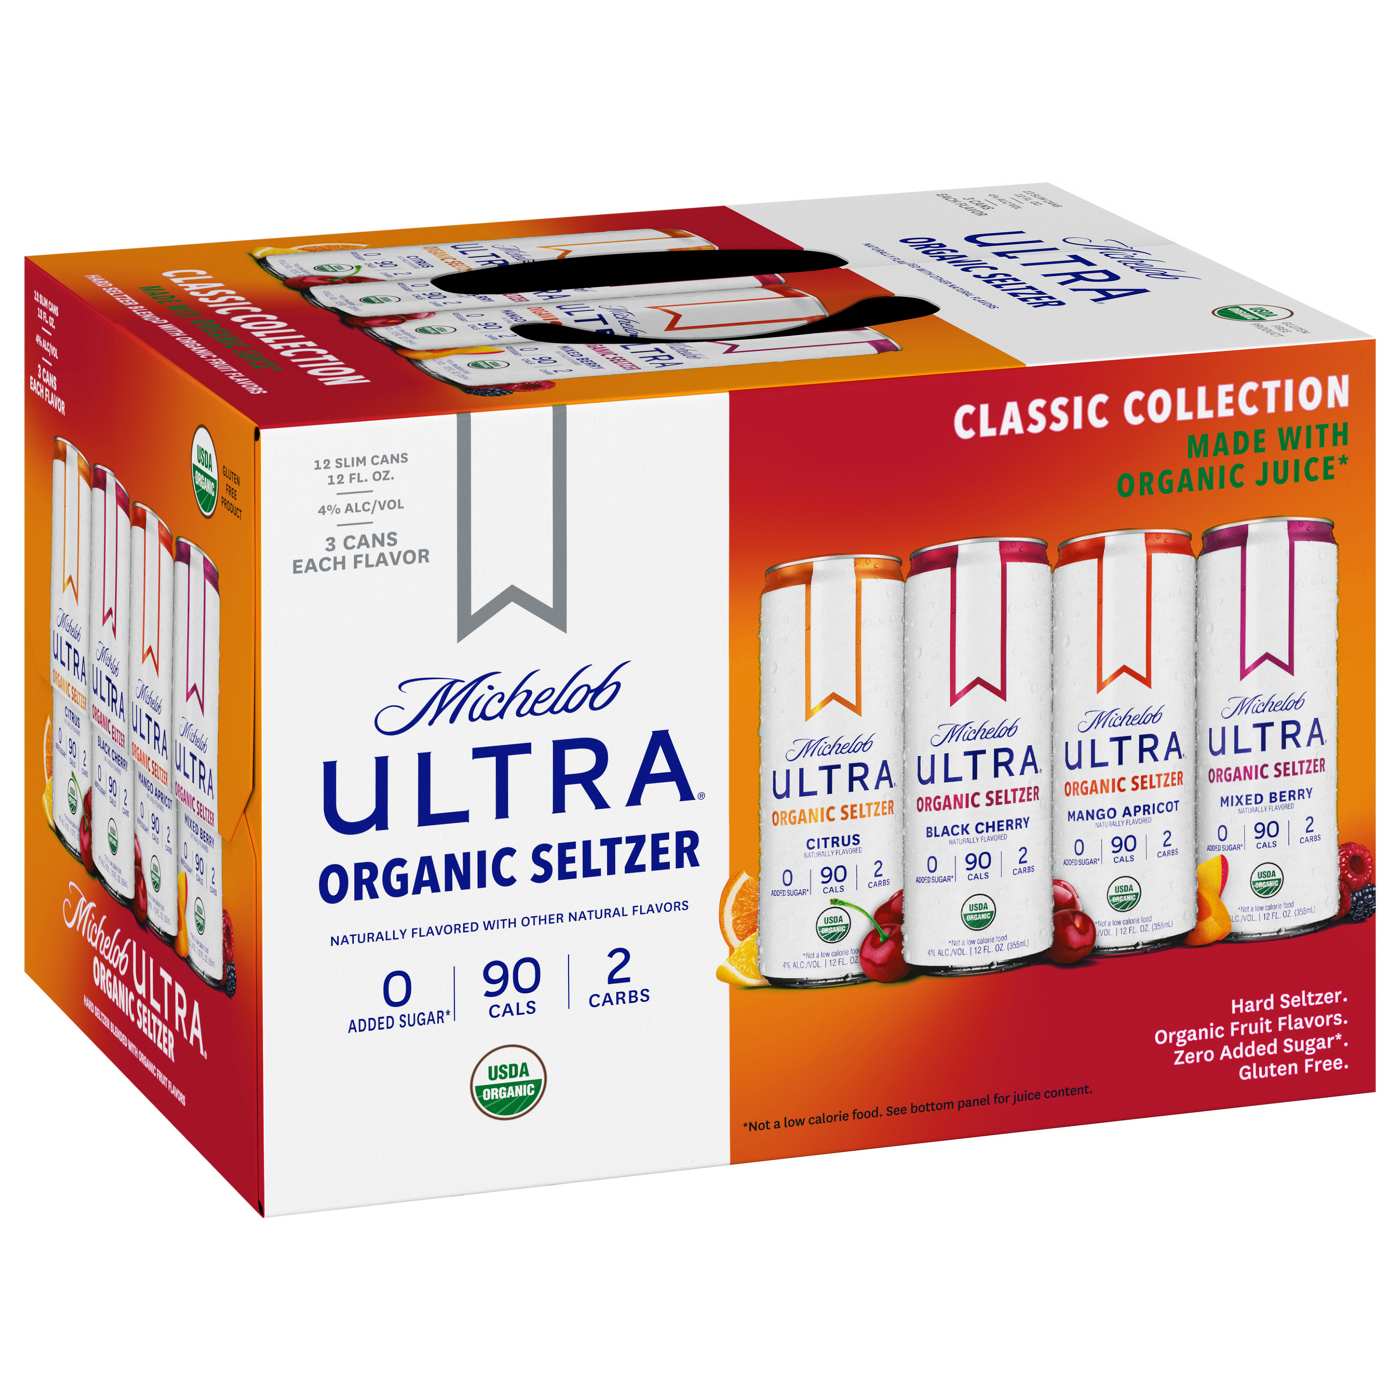 Michelob Ultra Organic Seltzer Variety Pack 12 oz Cans; image 1 of 2